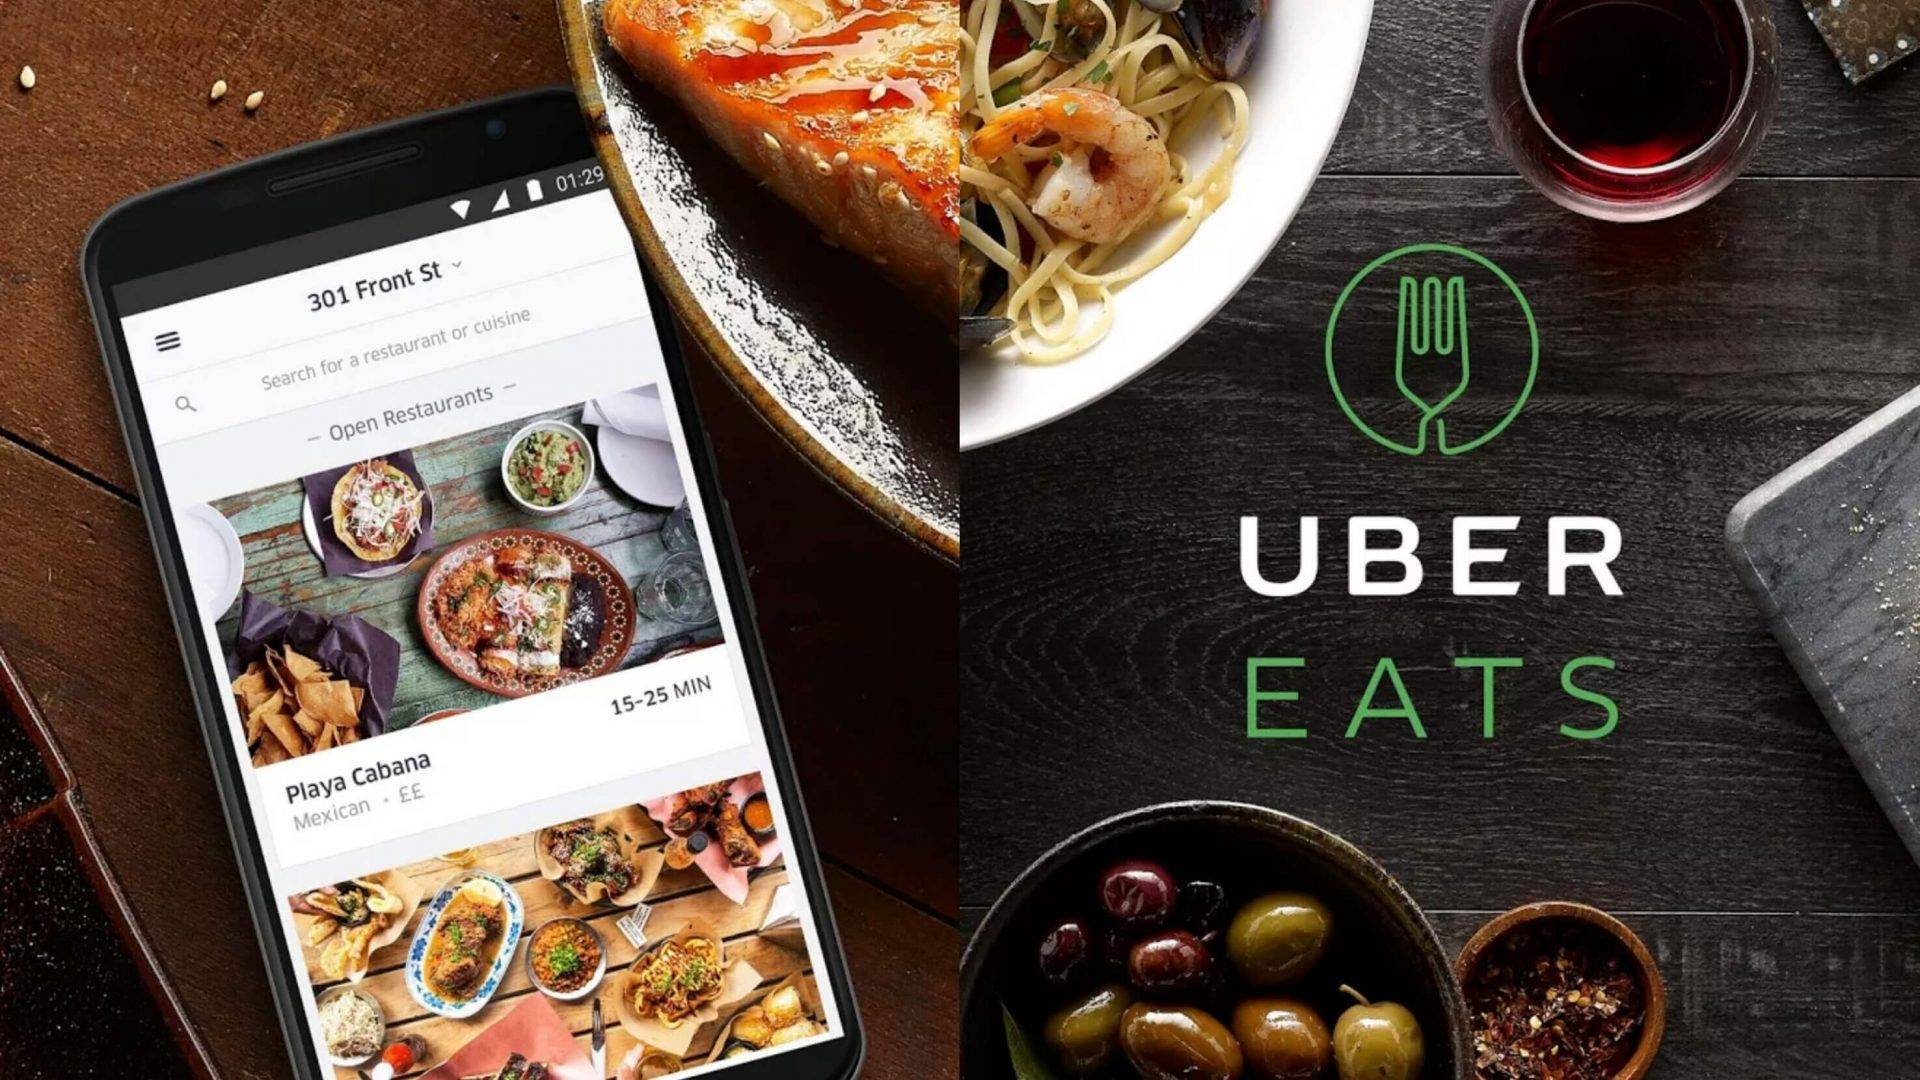 Uber Eats To Launch in 100 New Cities Including Egypt & Kenya - WeeTracker